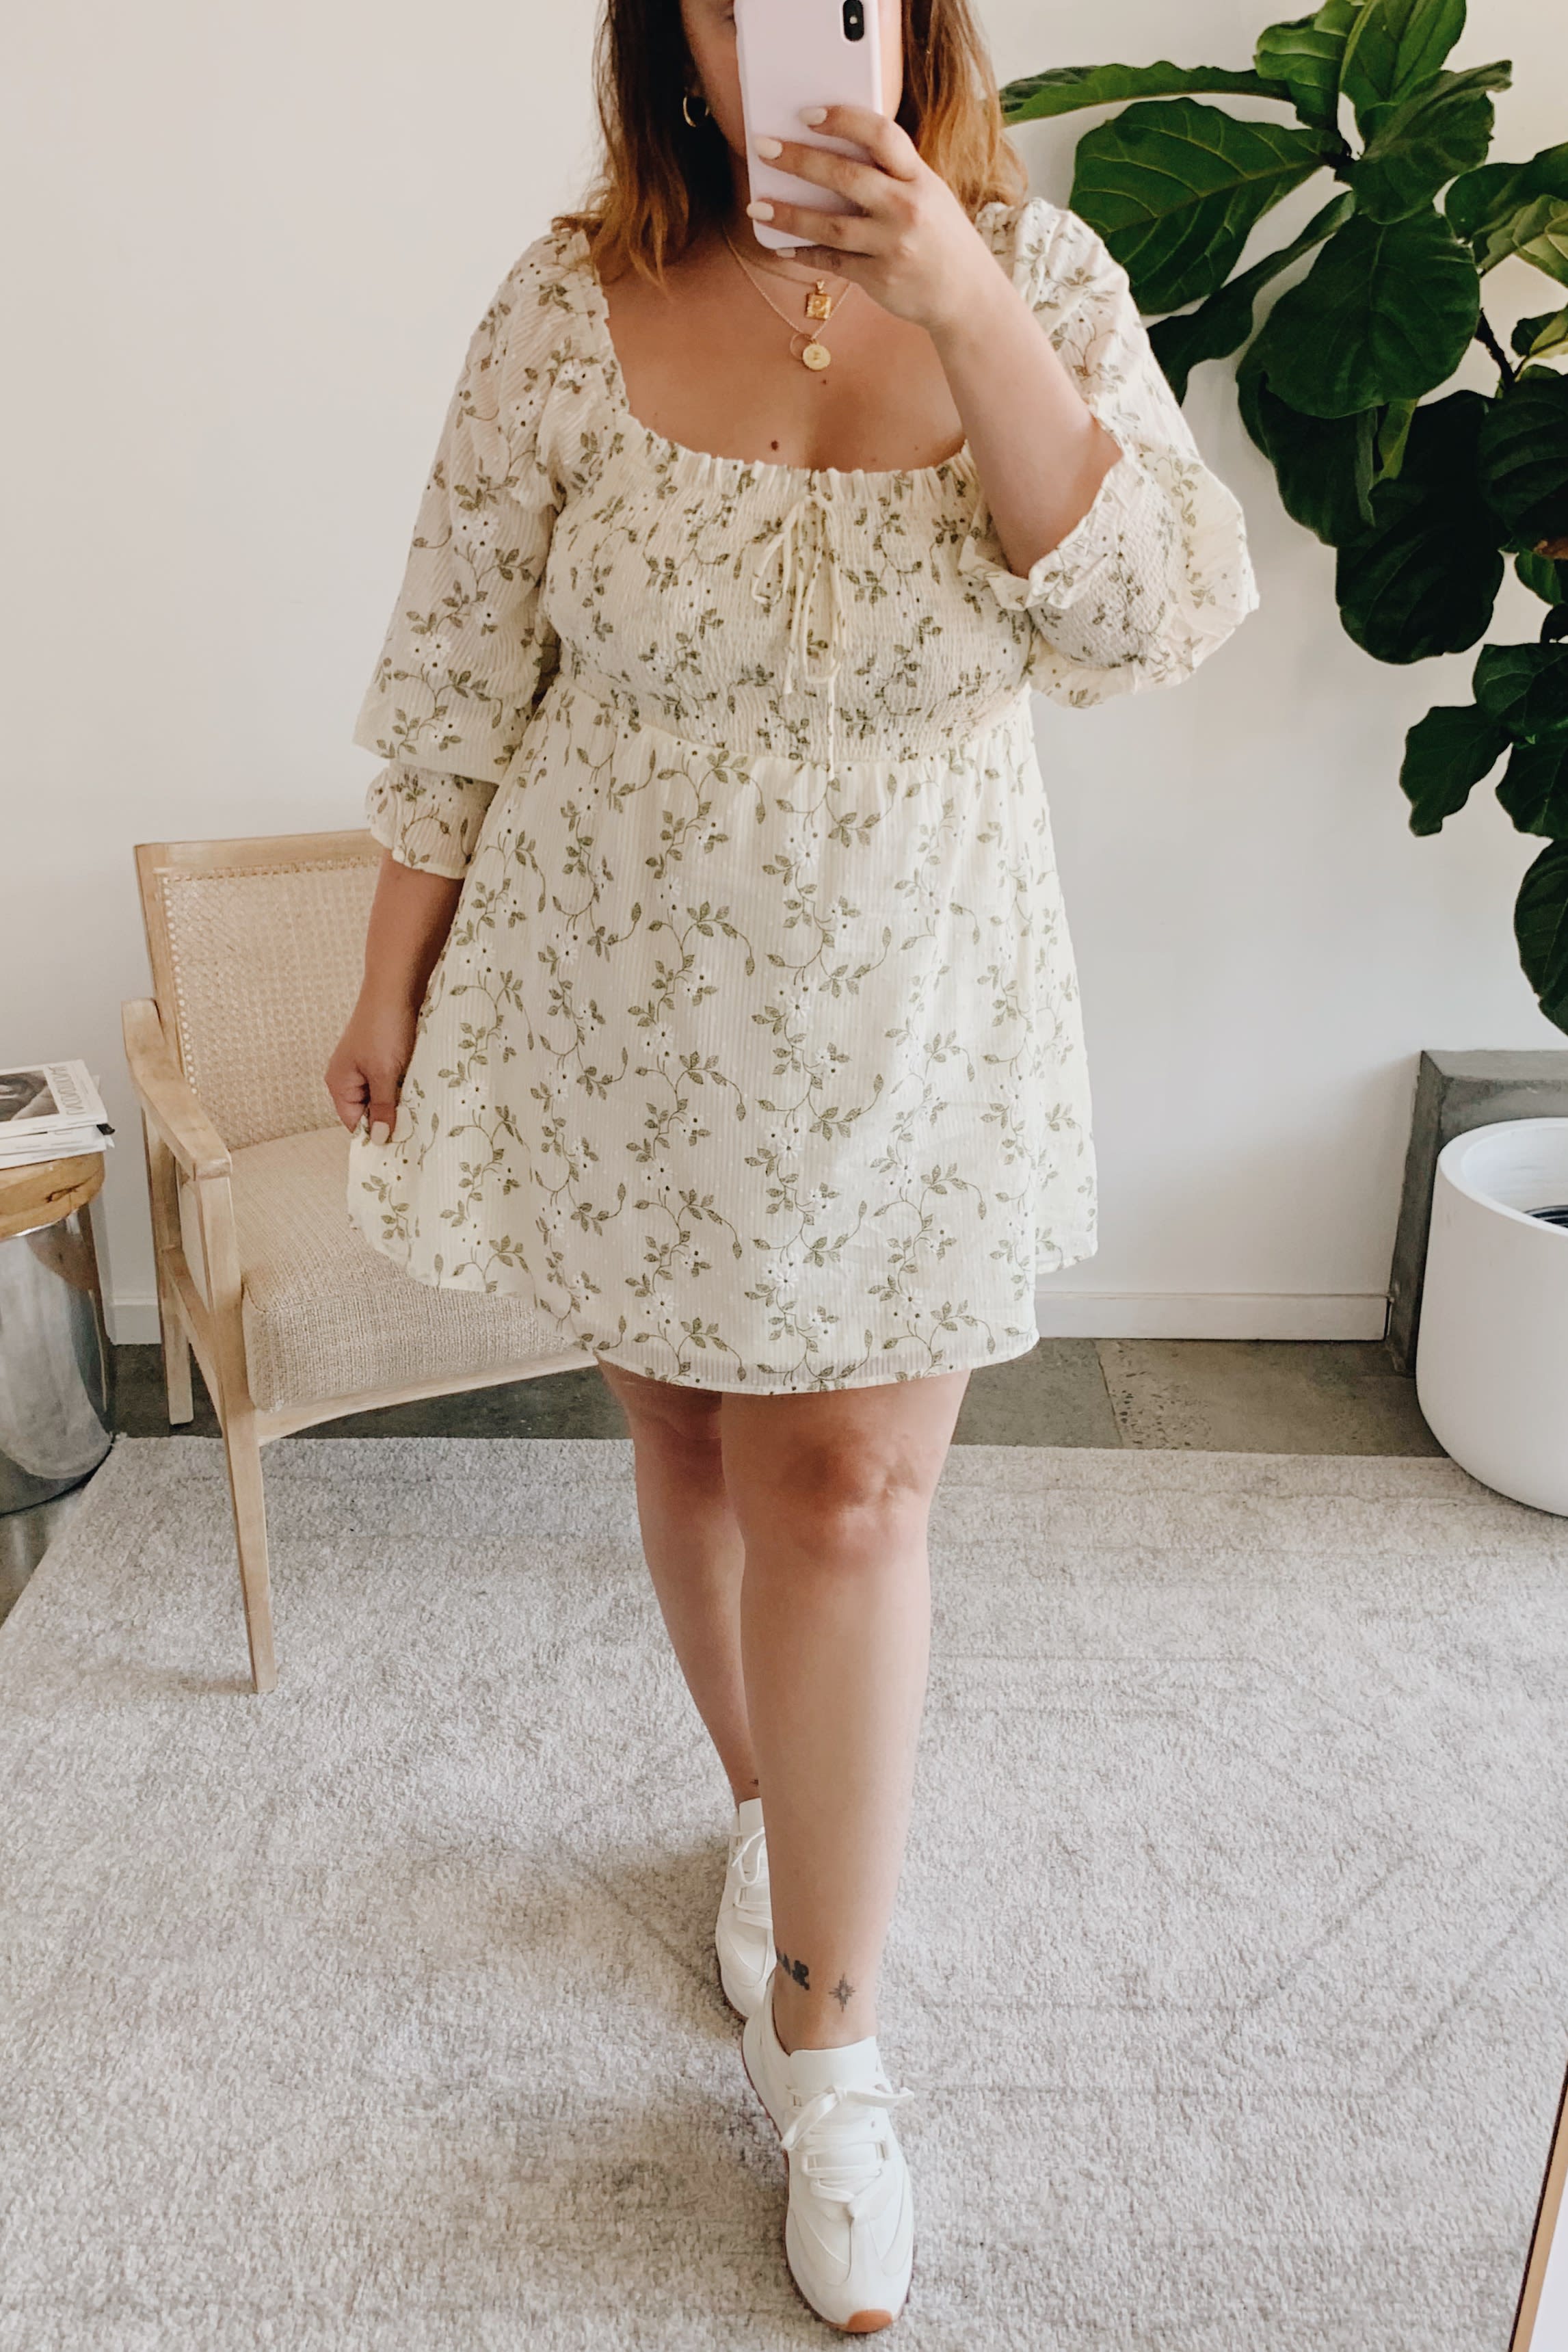 How To Wear Dresses And Sneakers: 11 Cute Outfit Ideas - Lulus.com Fashion  Blog